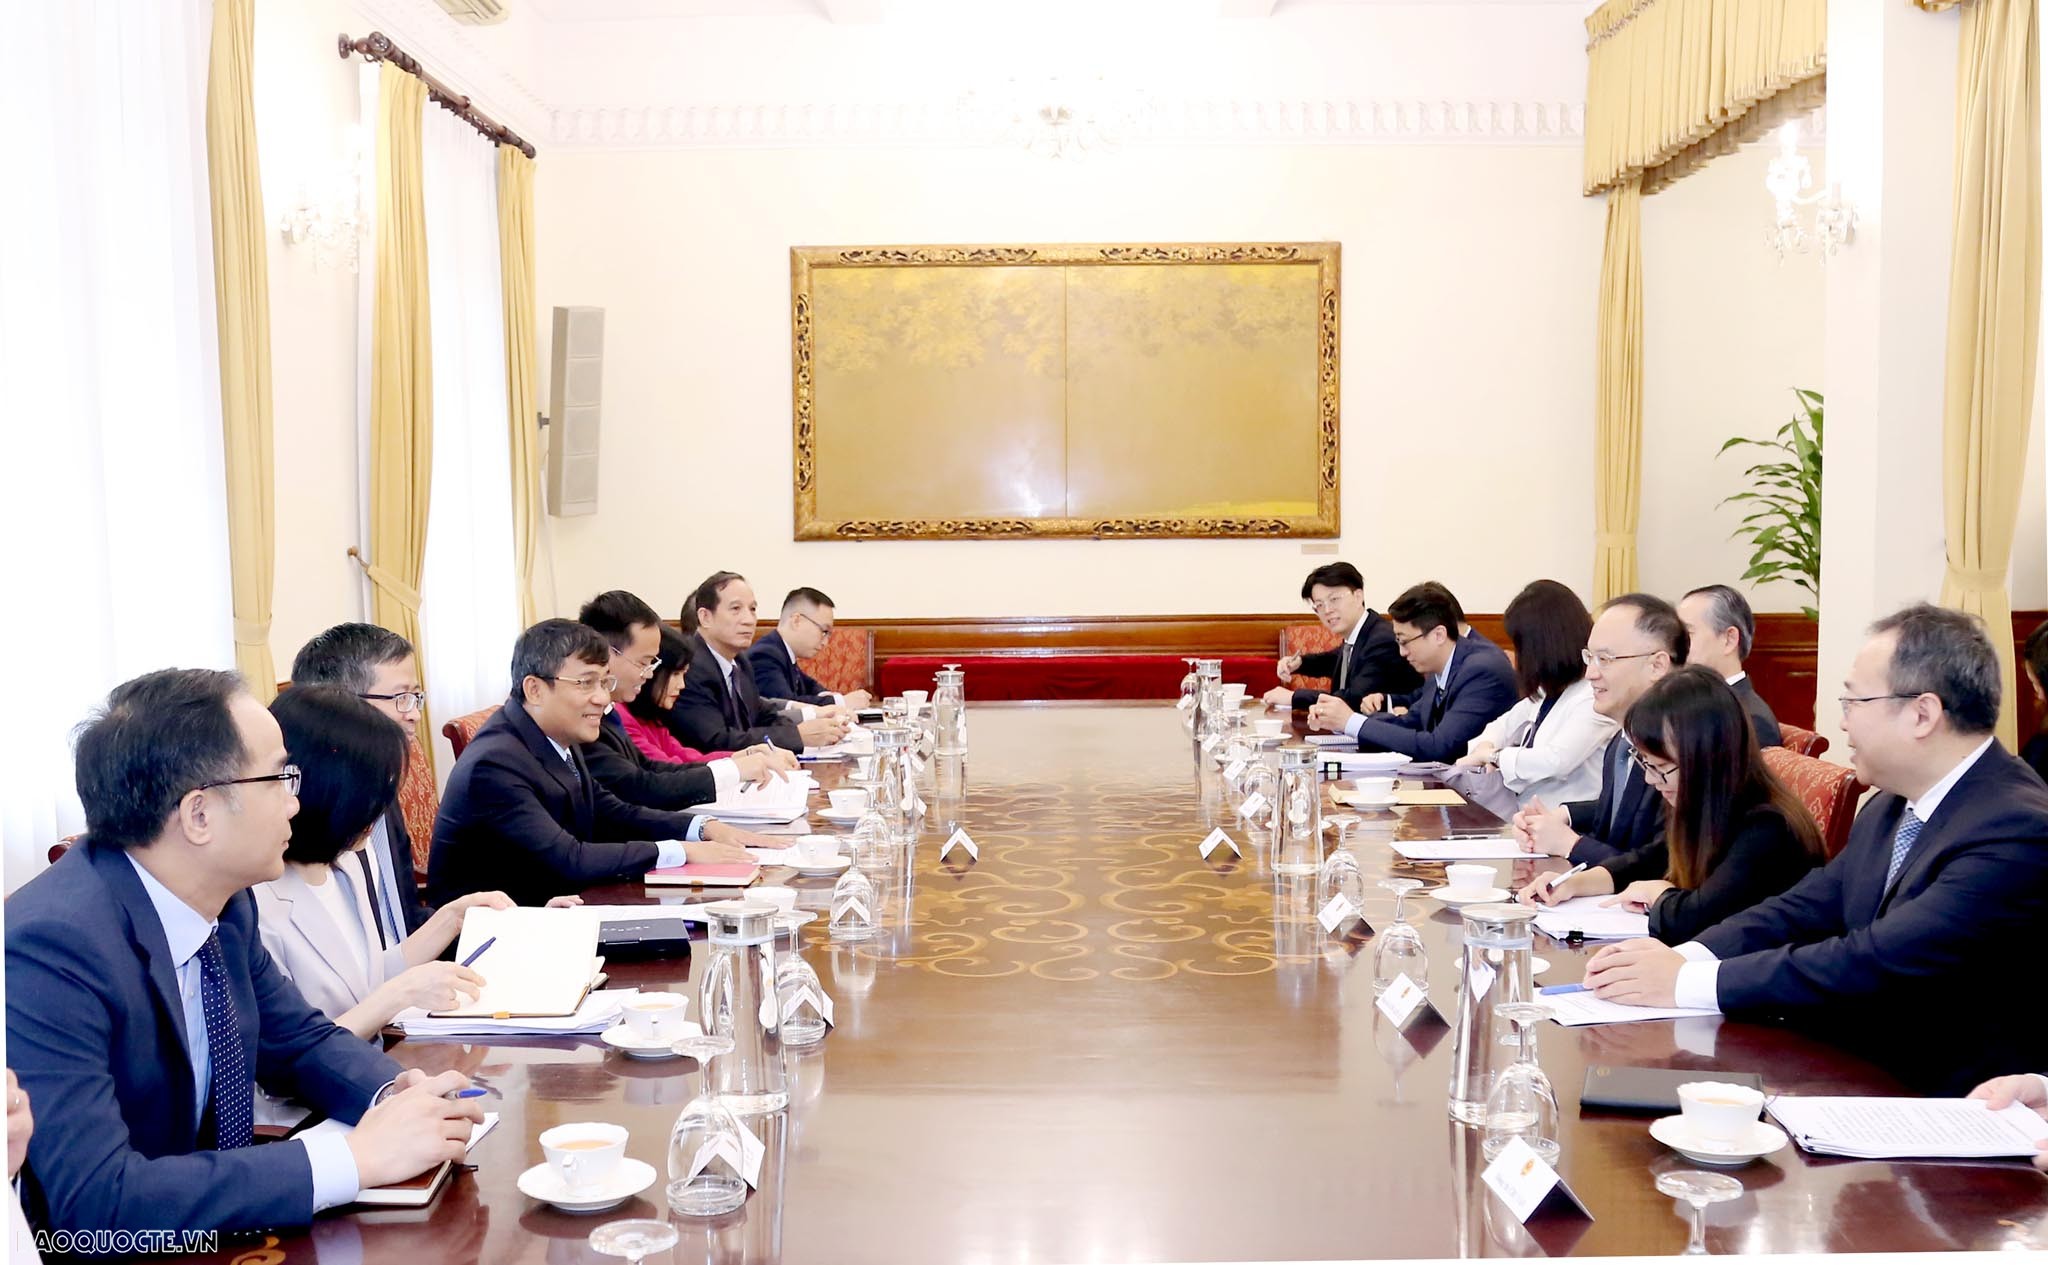 Deputy FM Nguyen Minh Vu receives Chinese Assistant Foreign Minister Nong Rong in Hanoi